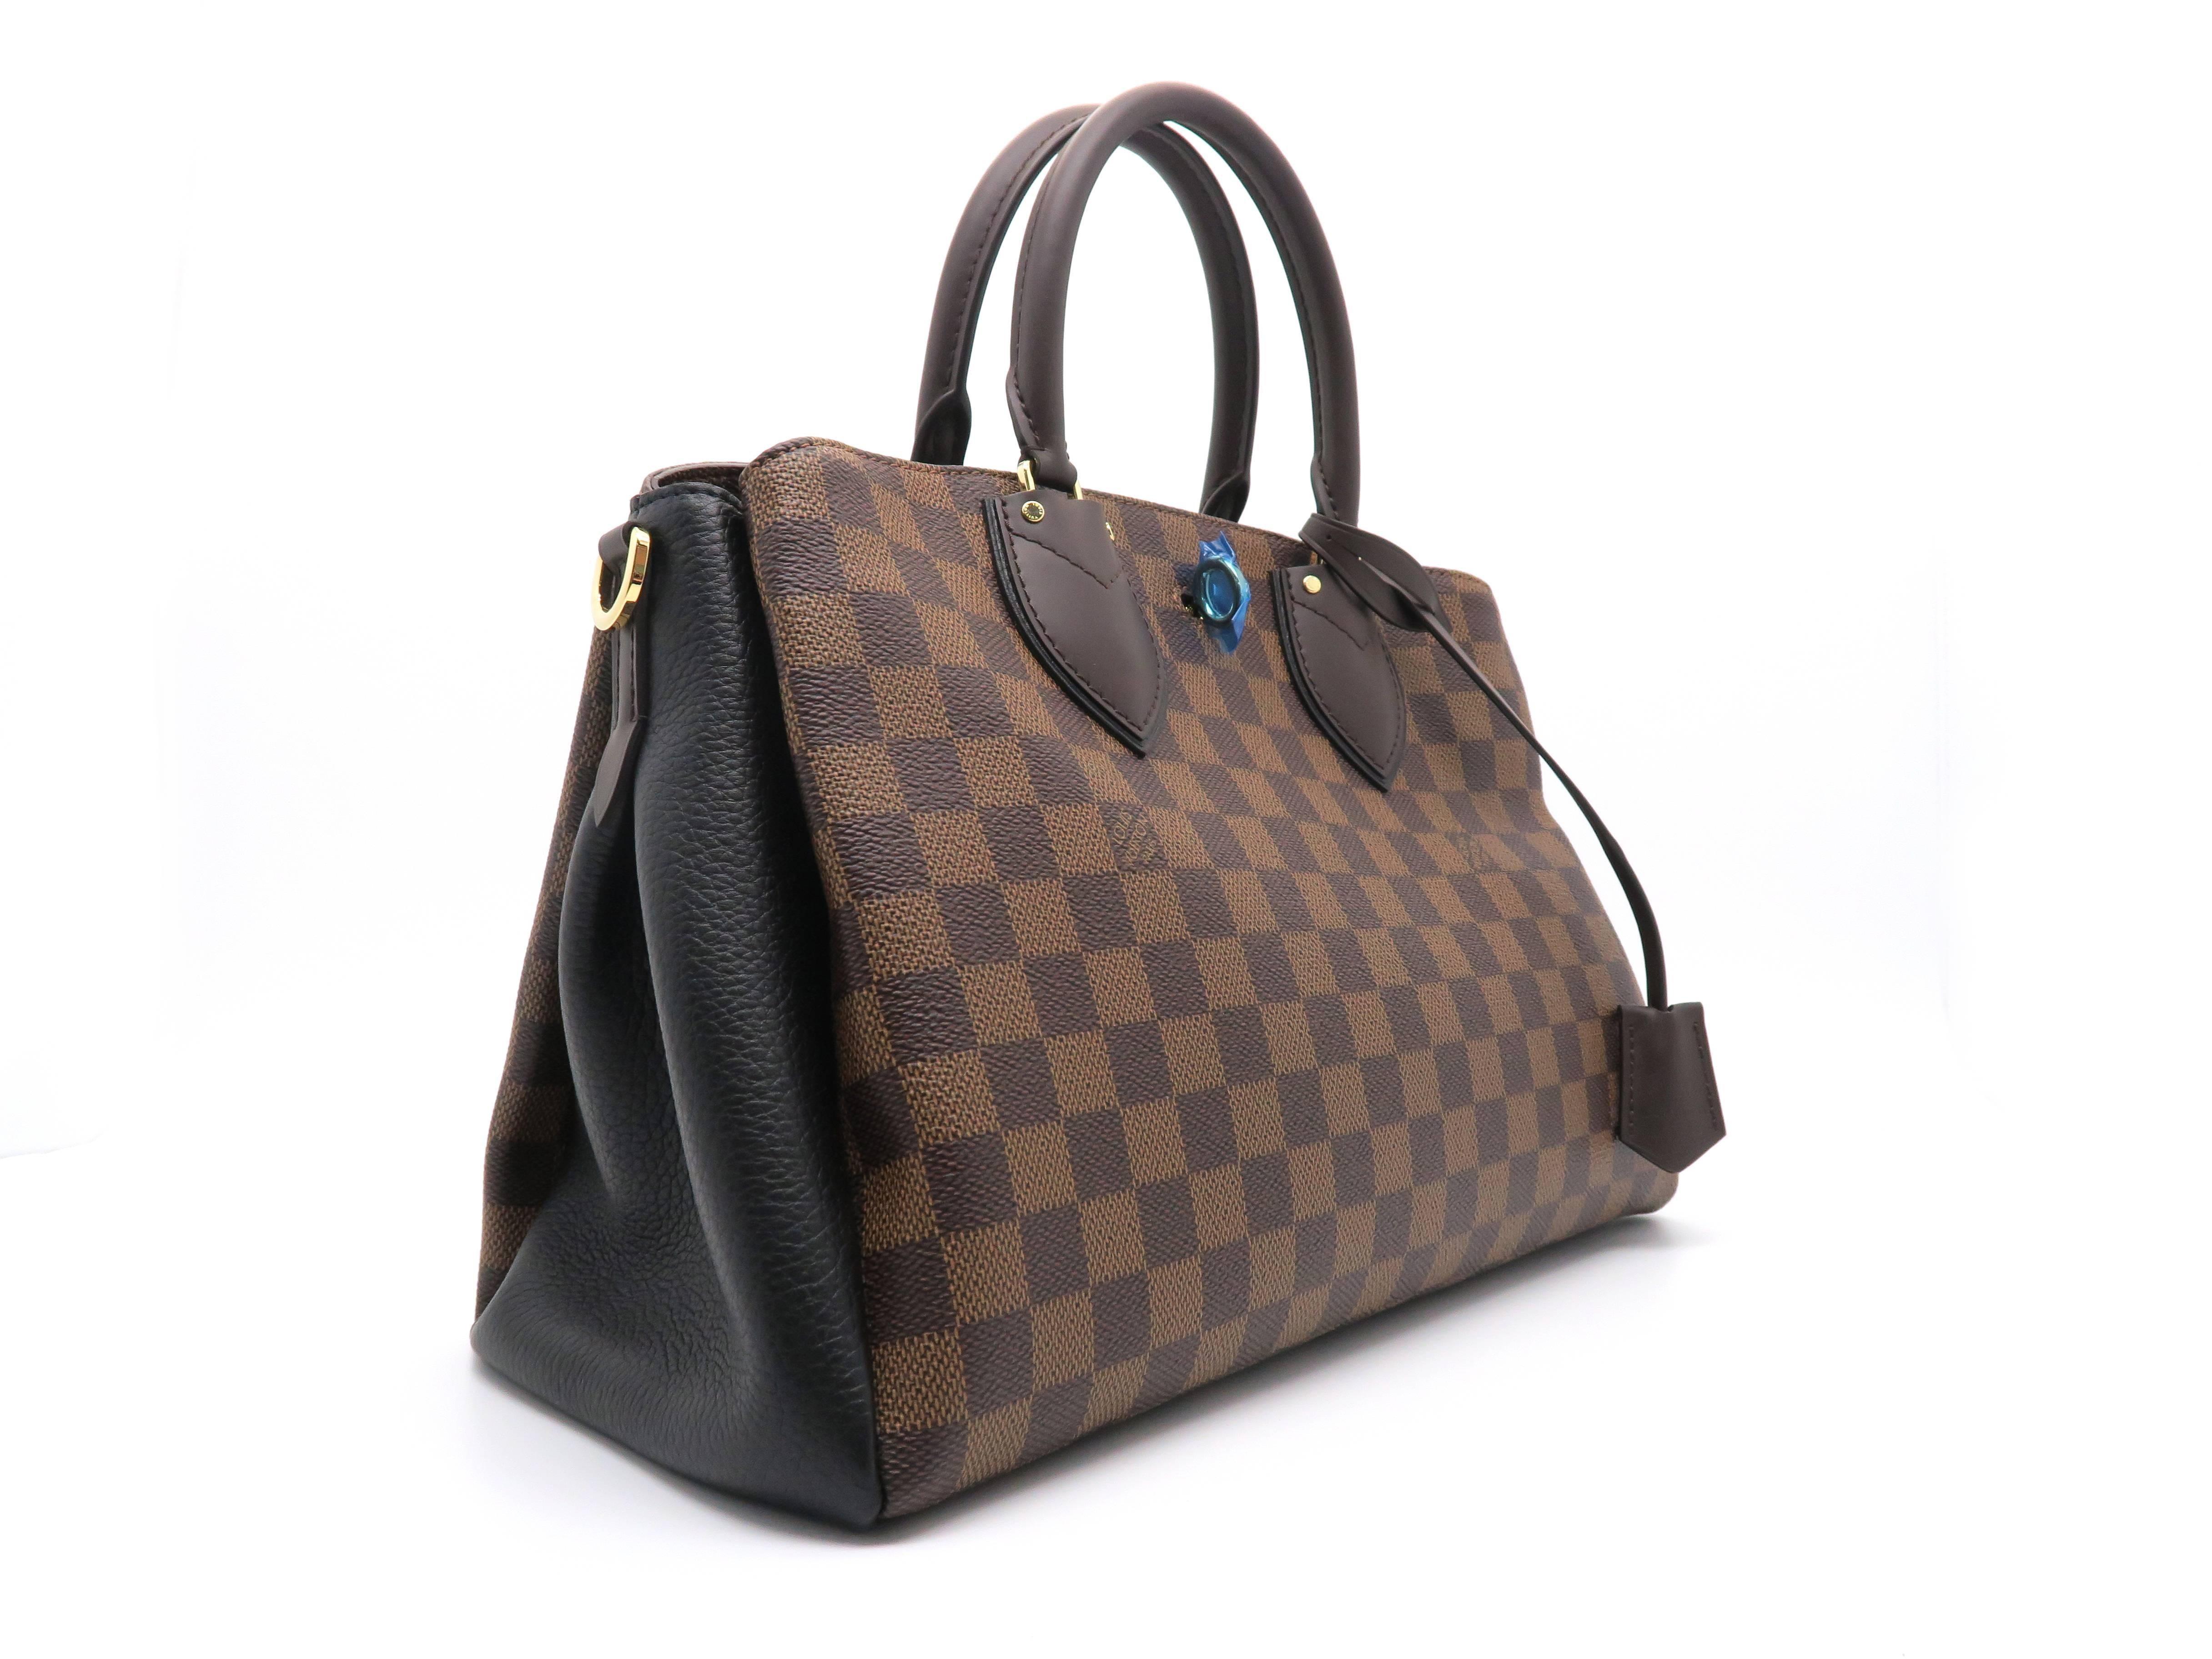 Color: Brown 

Material: Damier

Condition: Rank S 
Overall: Almost New 
Surface: Good
Corners: Good
Edges: Good
Handles/Straps: Good
Hardware: Good

Dimension: W34 × H23 × D17cm（W13.3" × H9.0" ×